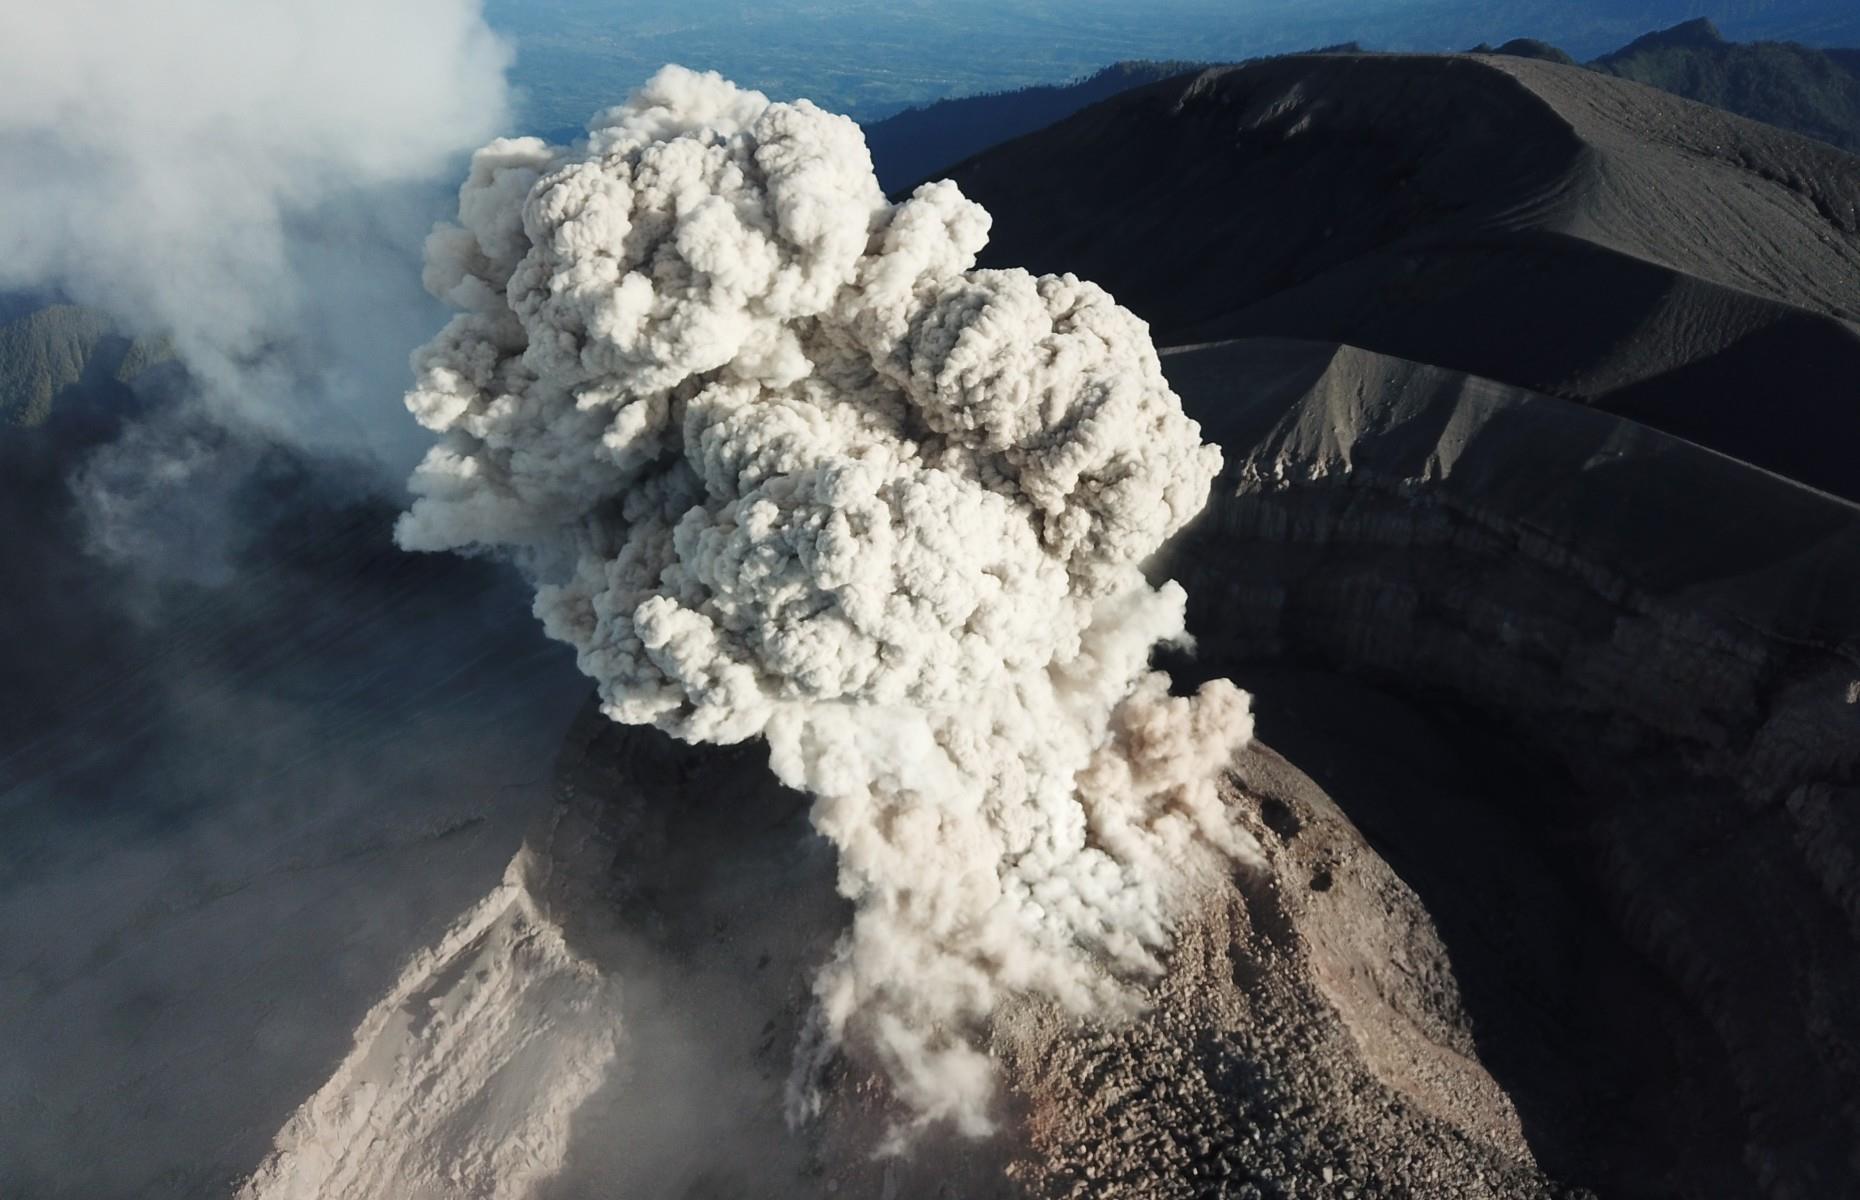 <p>Mount Semeru, a 12,060-foot (3,676m) volcano on Java, Indonesia’s most populated island, has been continually active since 1967 and is extremely hazardous. The current eruption has been continuing since 2014 and on Saturday, 4 December 2021 a major ash plume caused ashfall, pyroclastic flows and mudflows that were responsible for the deaths of at least 48 people. According to the head of Indonesia’s geological agency, the eruption was caused by heavy rainfall on the lip of Semeru’s crater, which led to its partial collapse.</p>